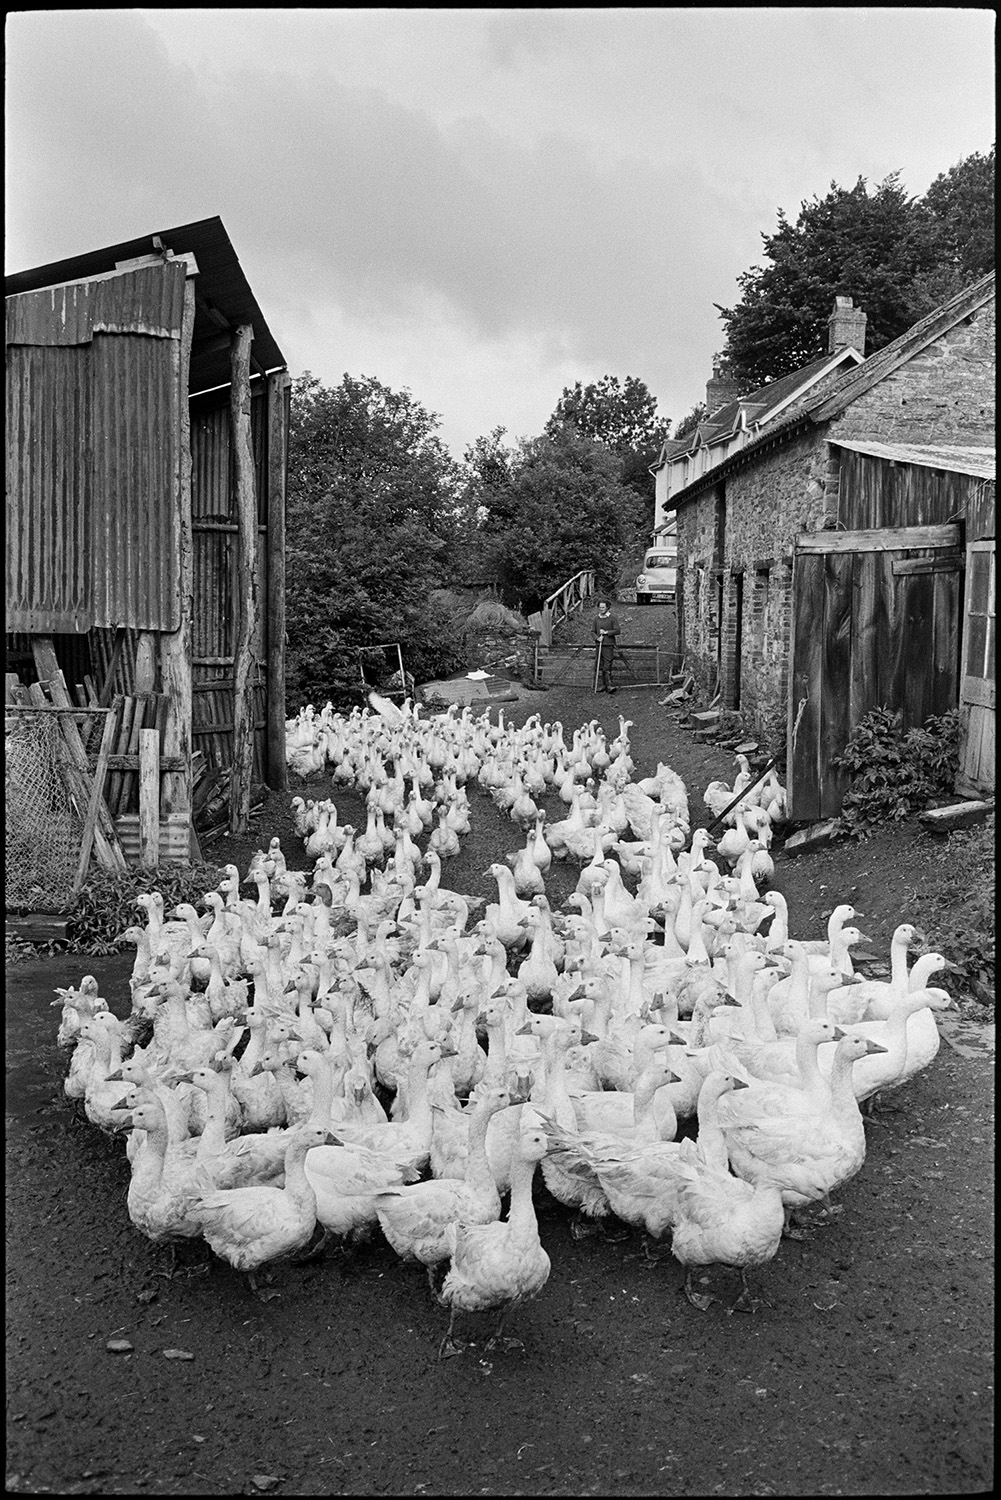 Geese in farmyard with barn, corrugated iron. 
[A large flock of geese walking past a corrugated iron barn and other farm buildings in a farmyard at Indiwell, Swimbridge.]